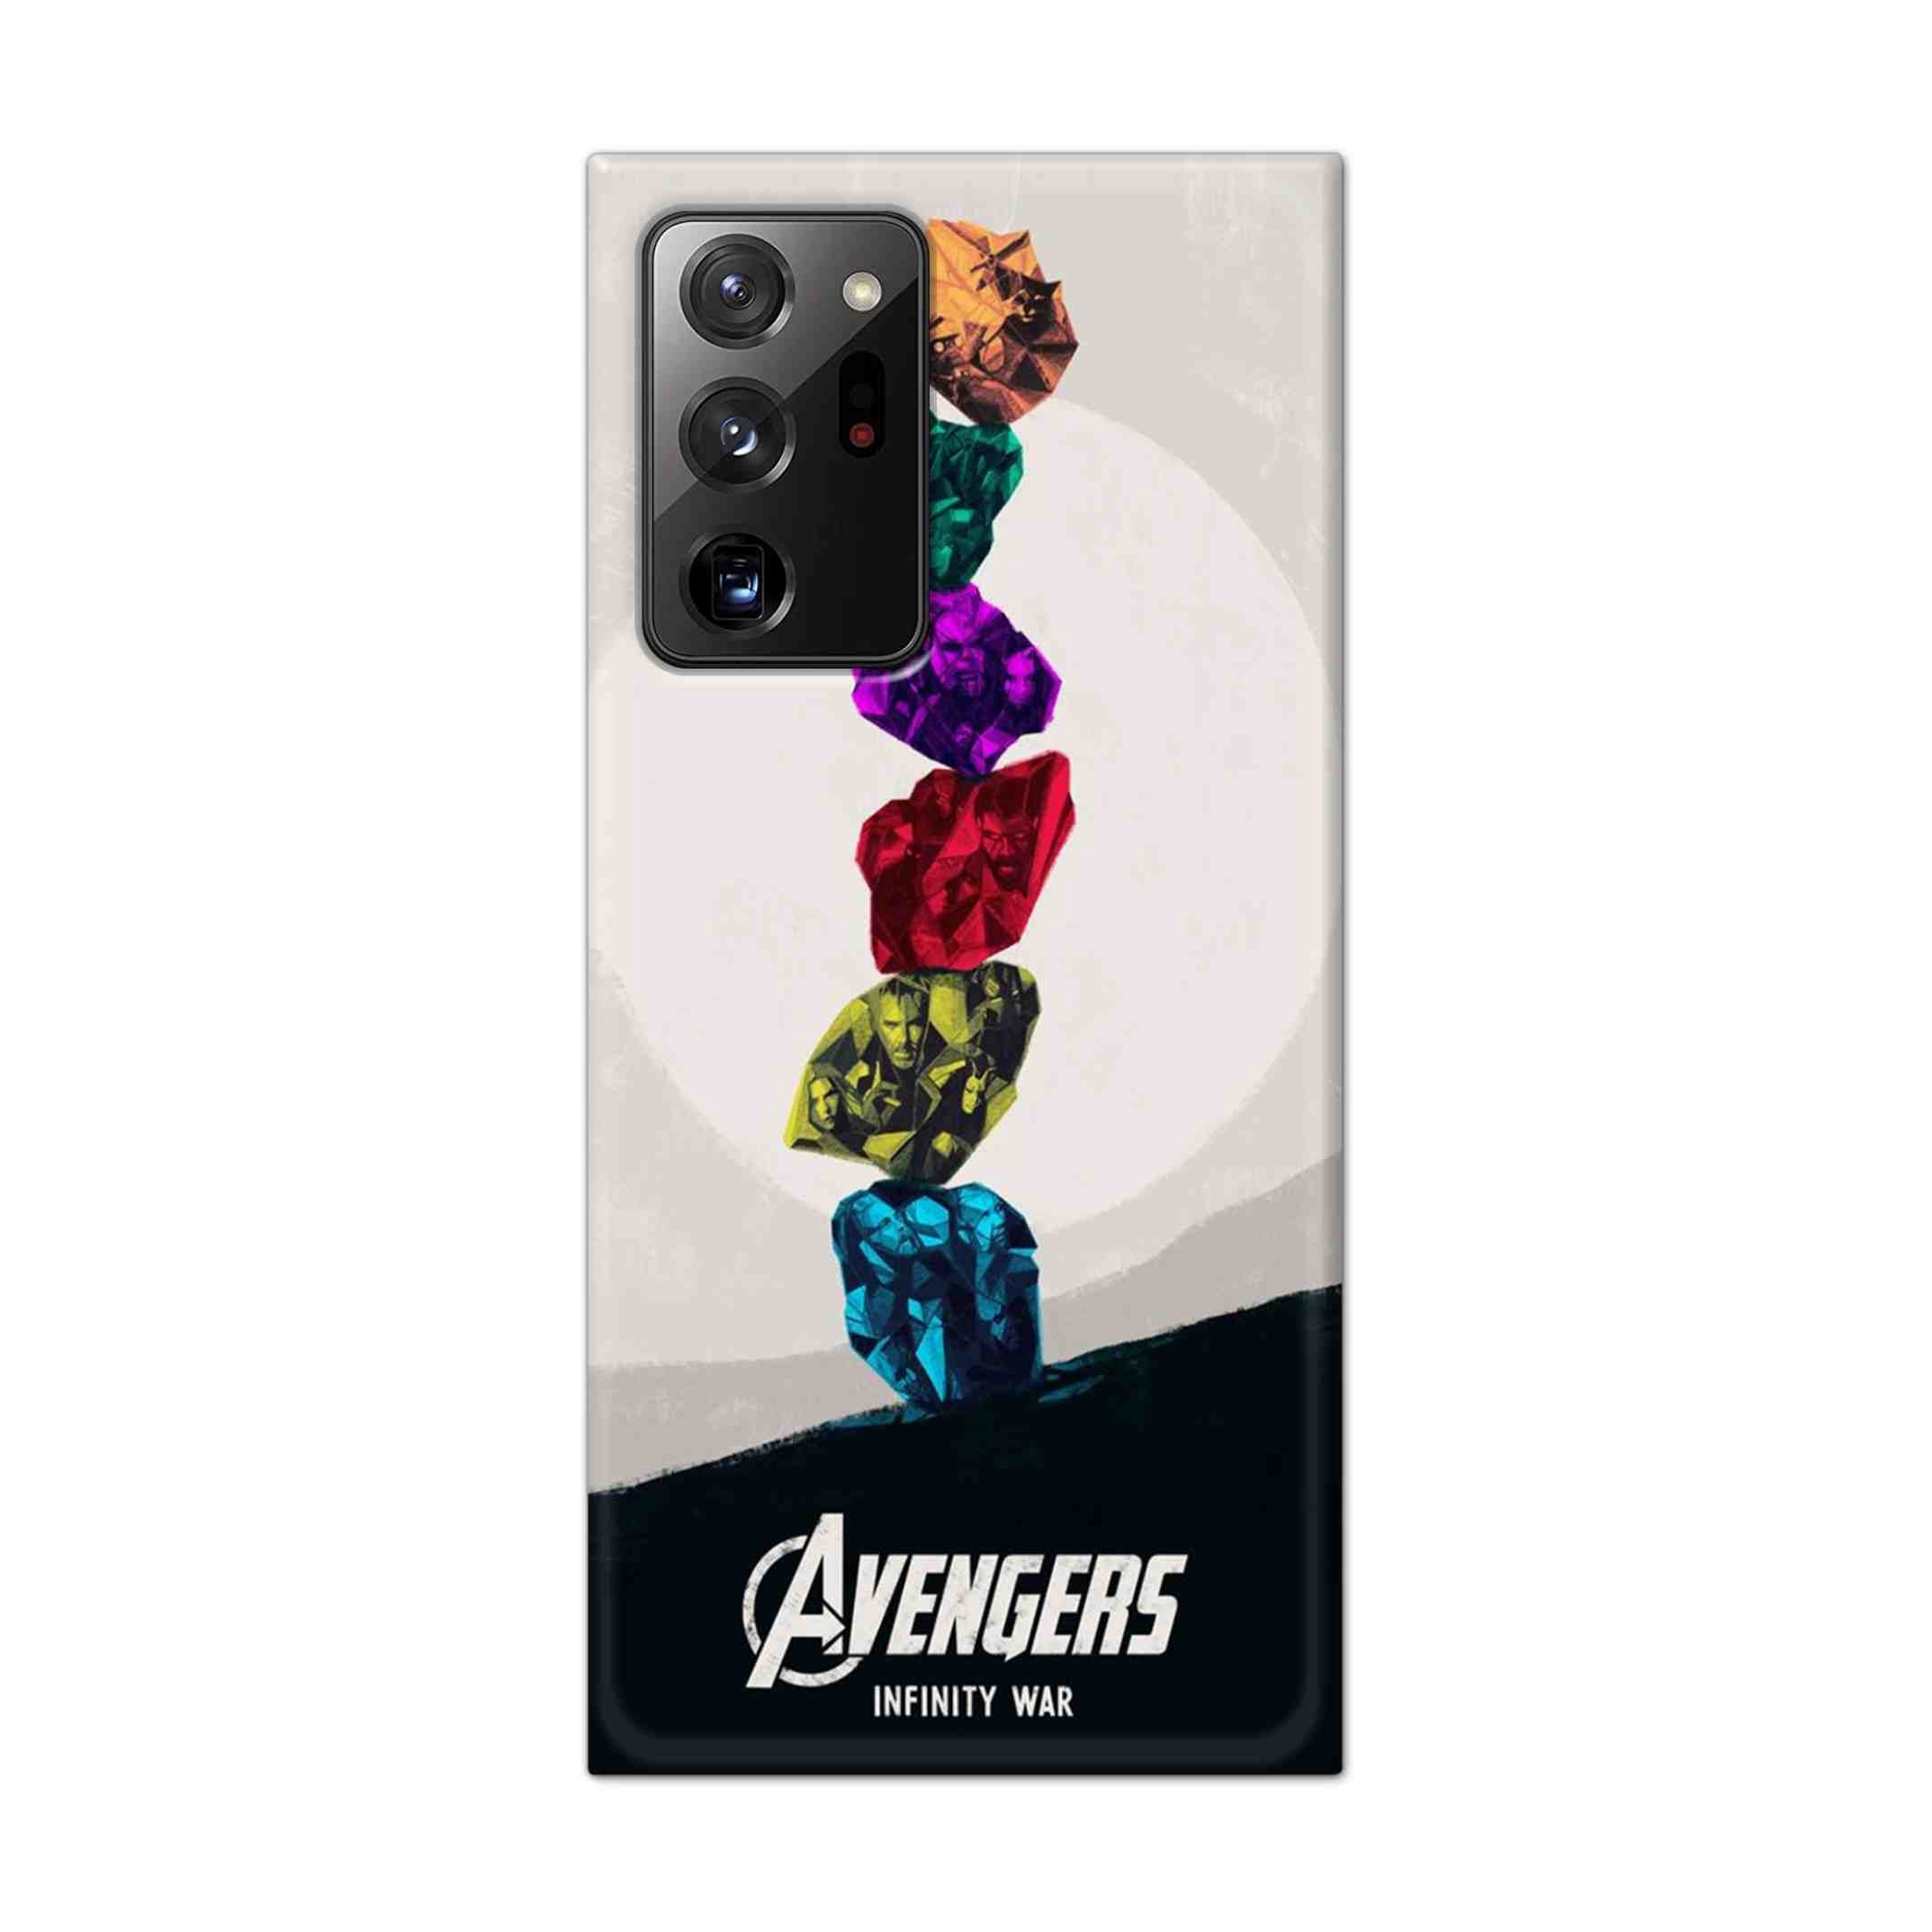 Buy Avengers Stone Hard Back Mobile Phone Case Cover For Samsung Galaxy Note 20 Ultra Online